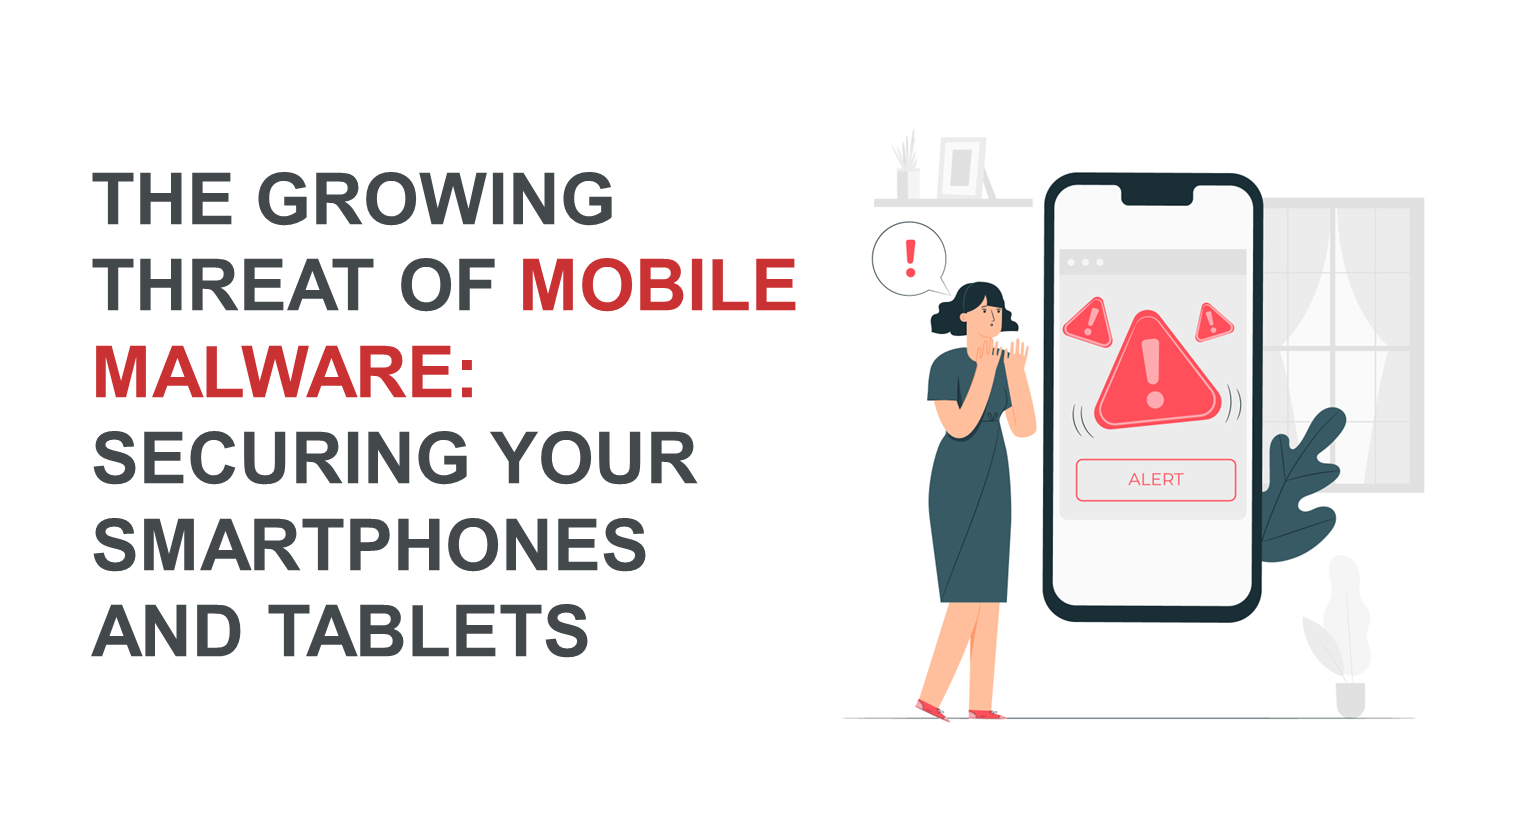 The Growing Threat of Mobile Malware: Securing Your Smartphones and Tablets